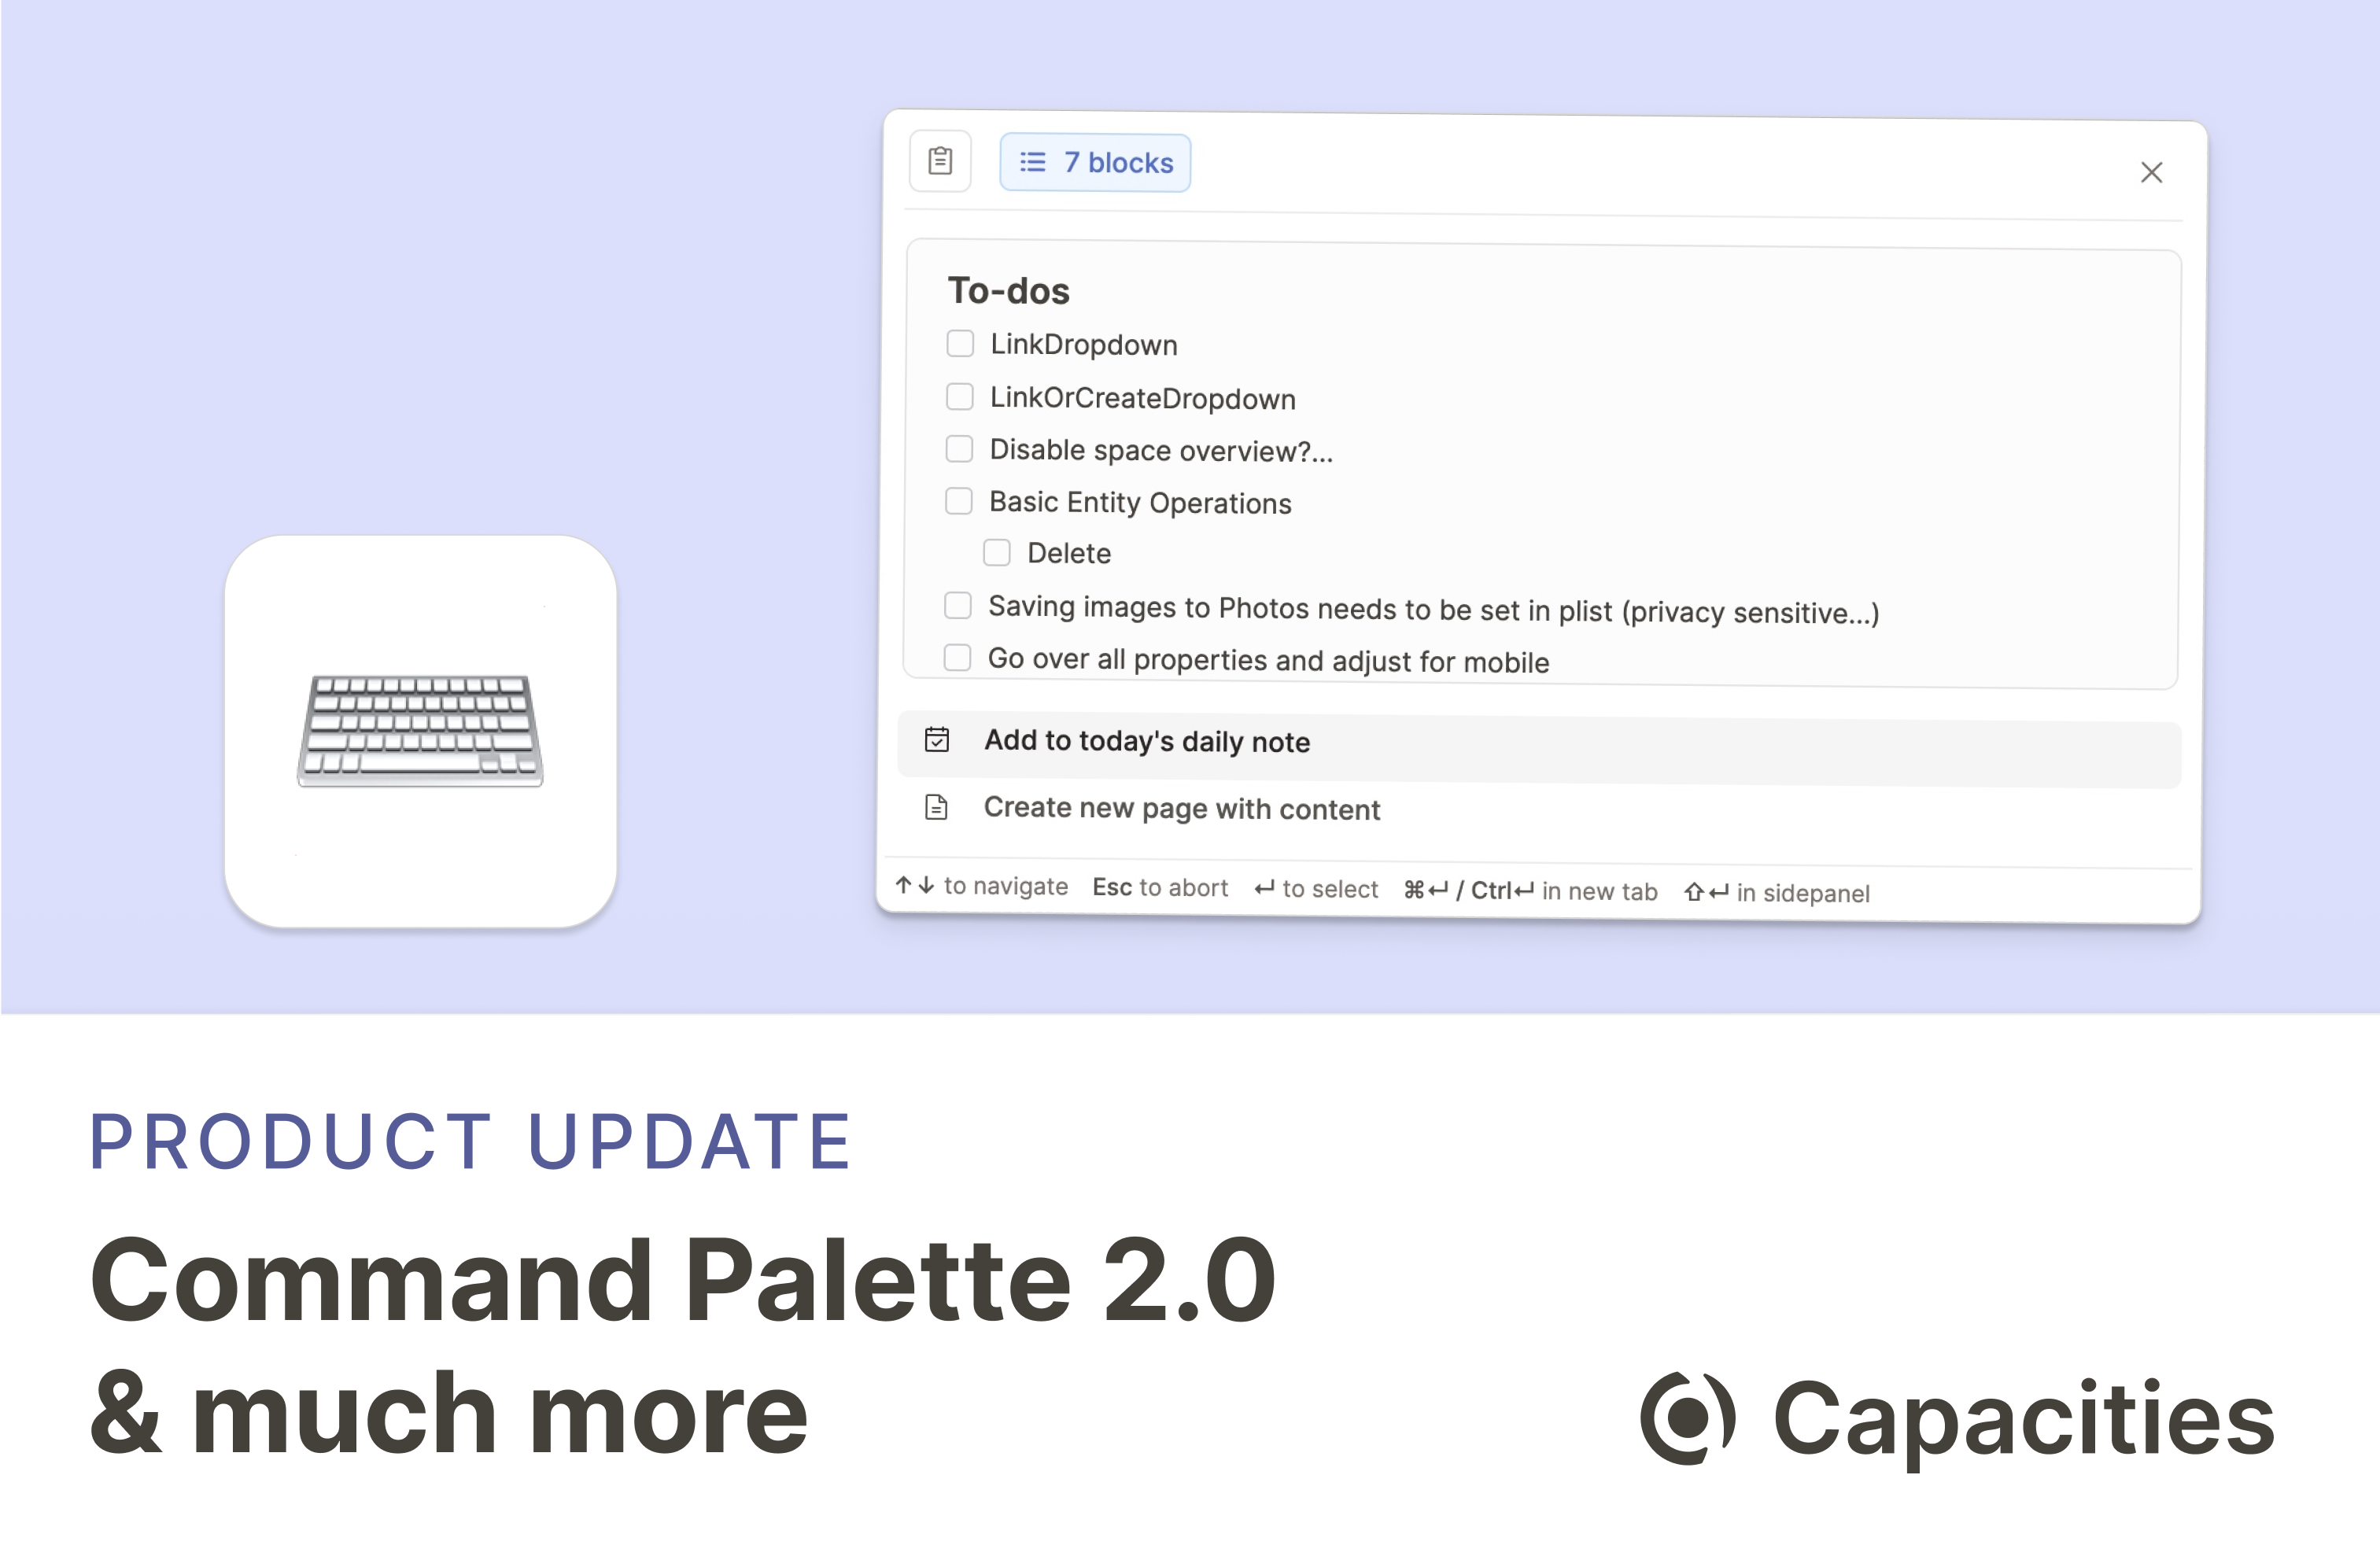 Command Palette 2.0 & much more